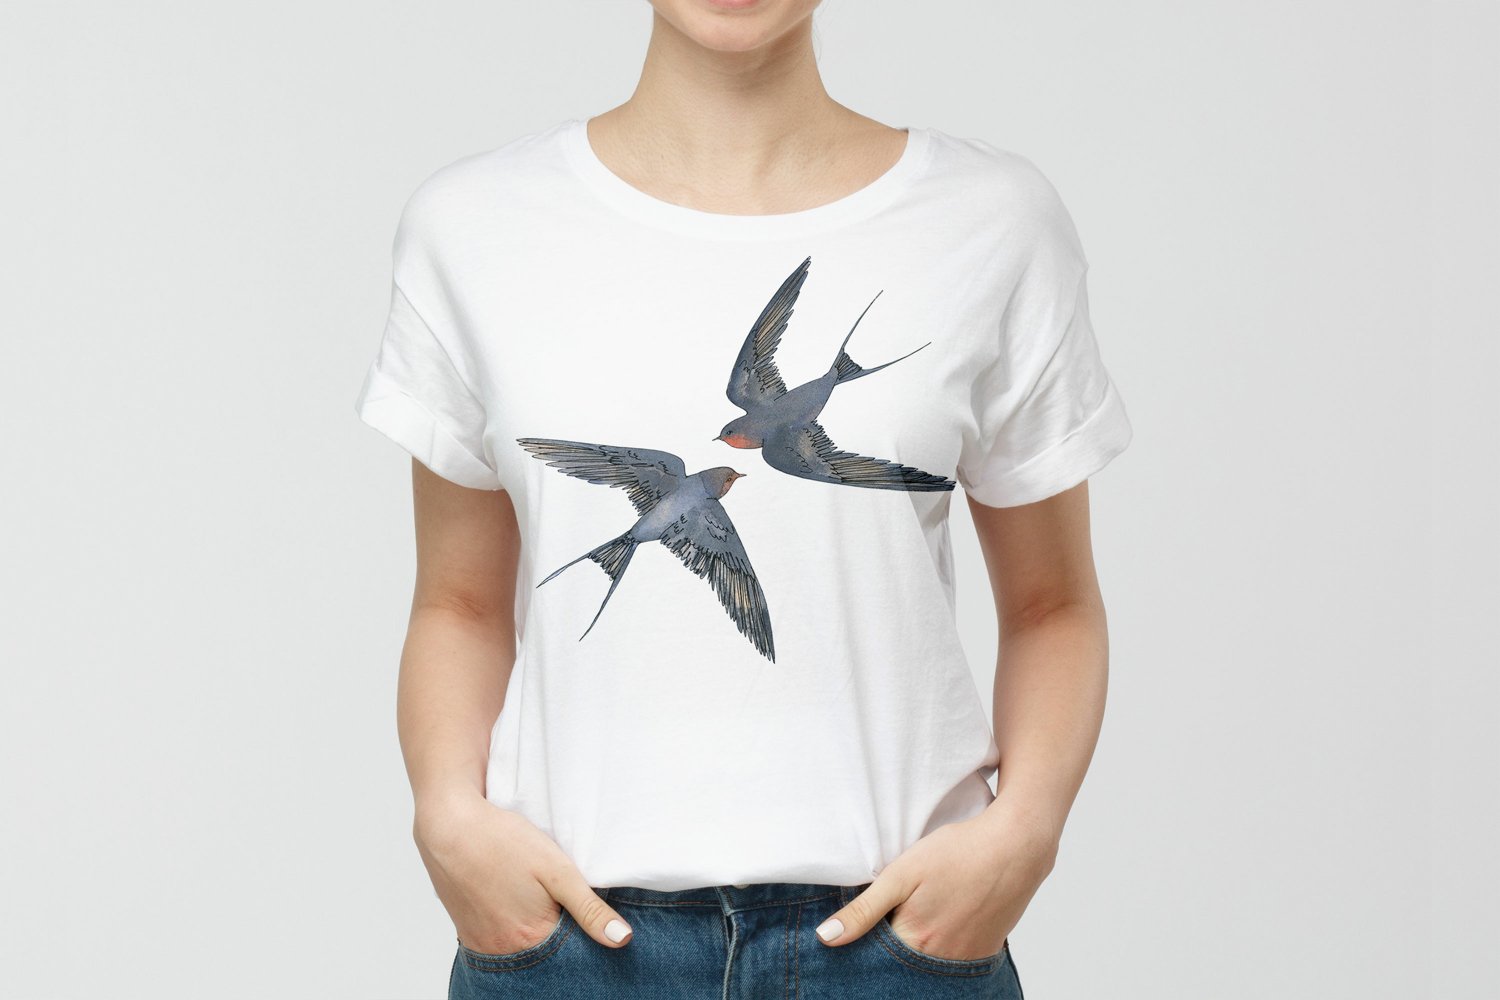 Free modern girl wearing t shirt with swallows.